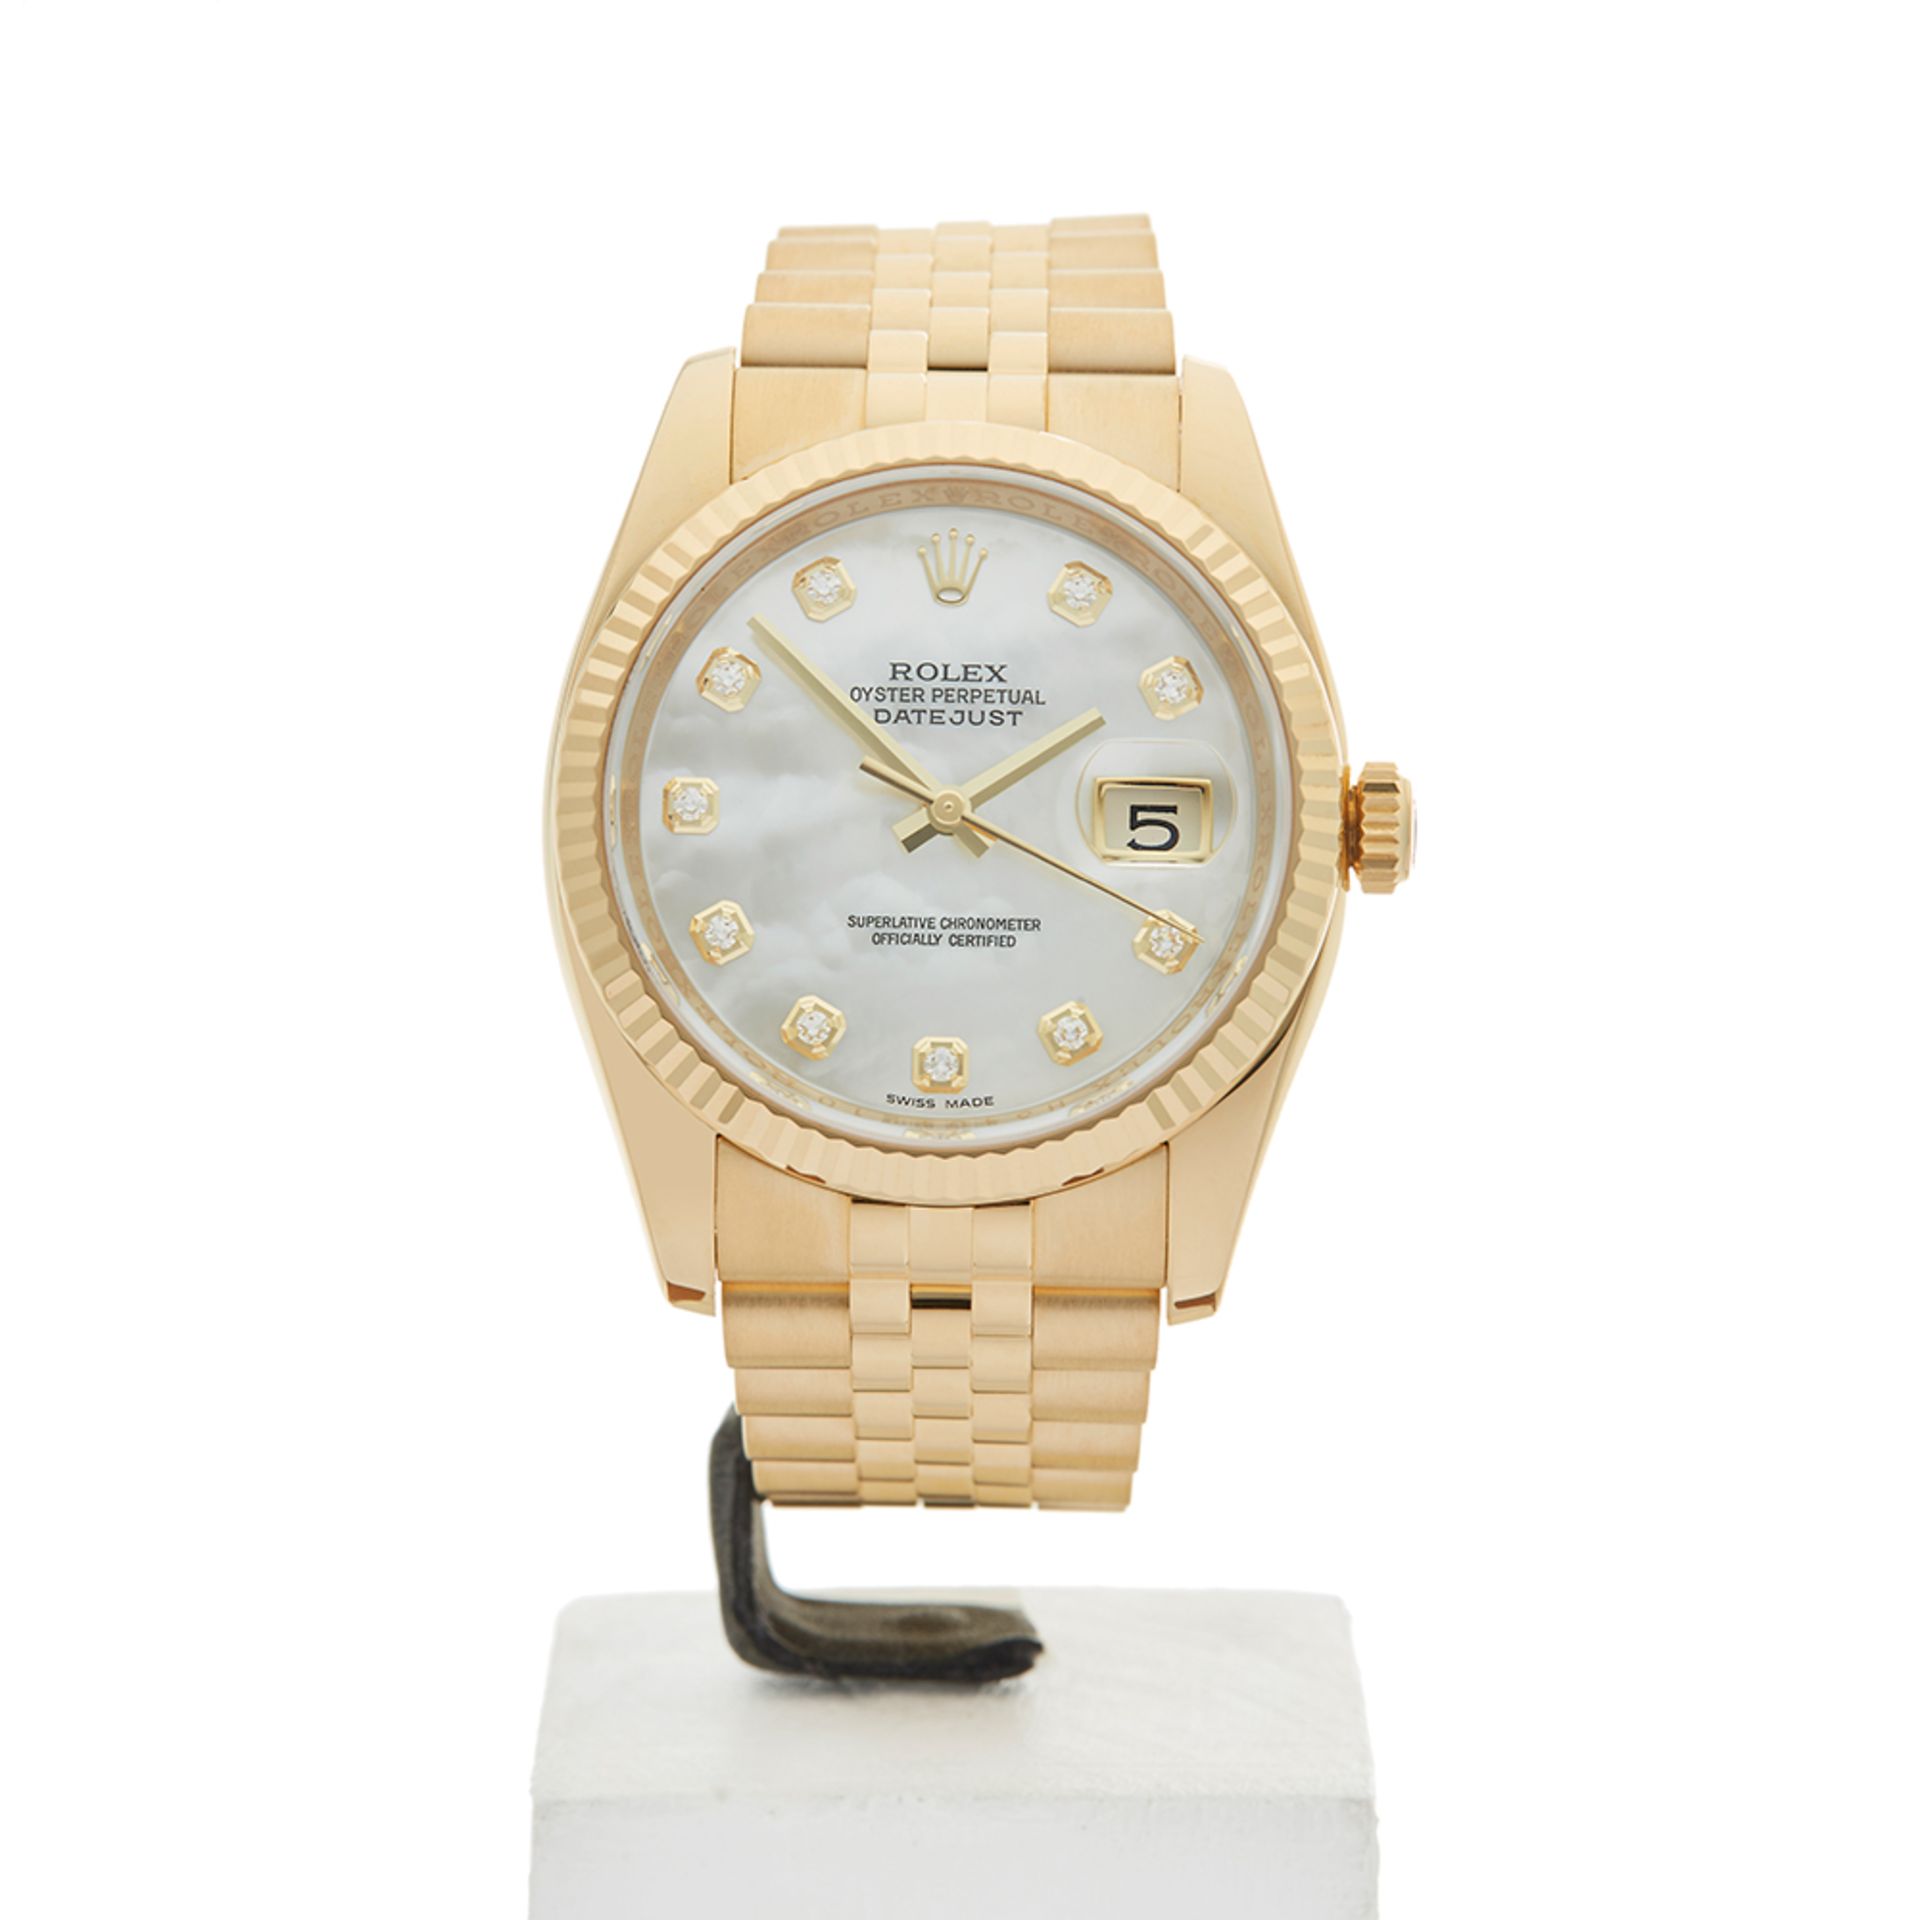 Datejust 36mm 18k Yellow Gold - 116238 - Image 2 of 9